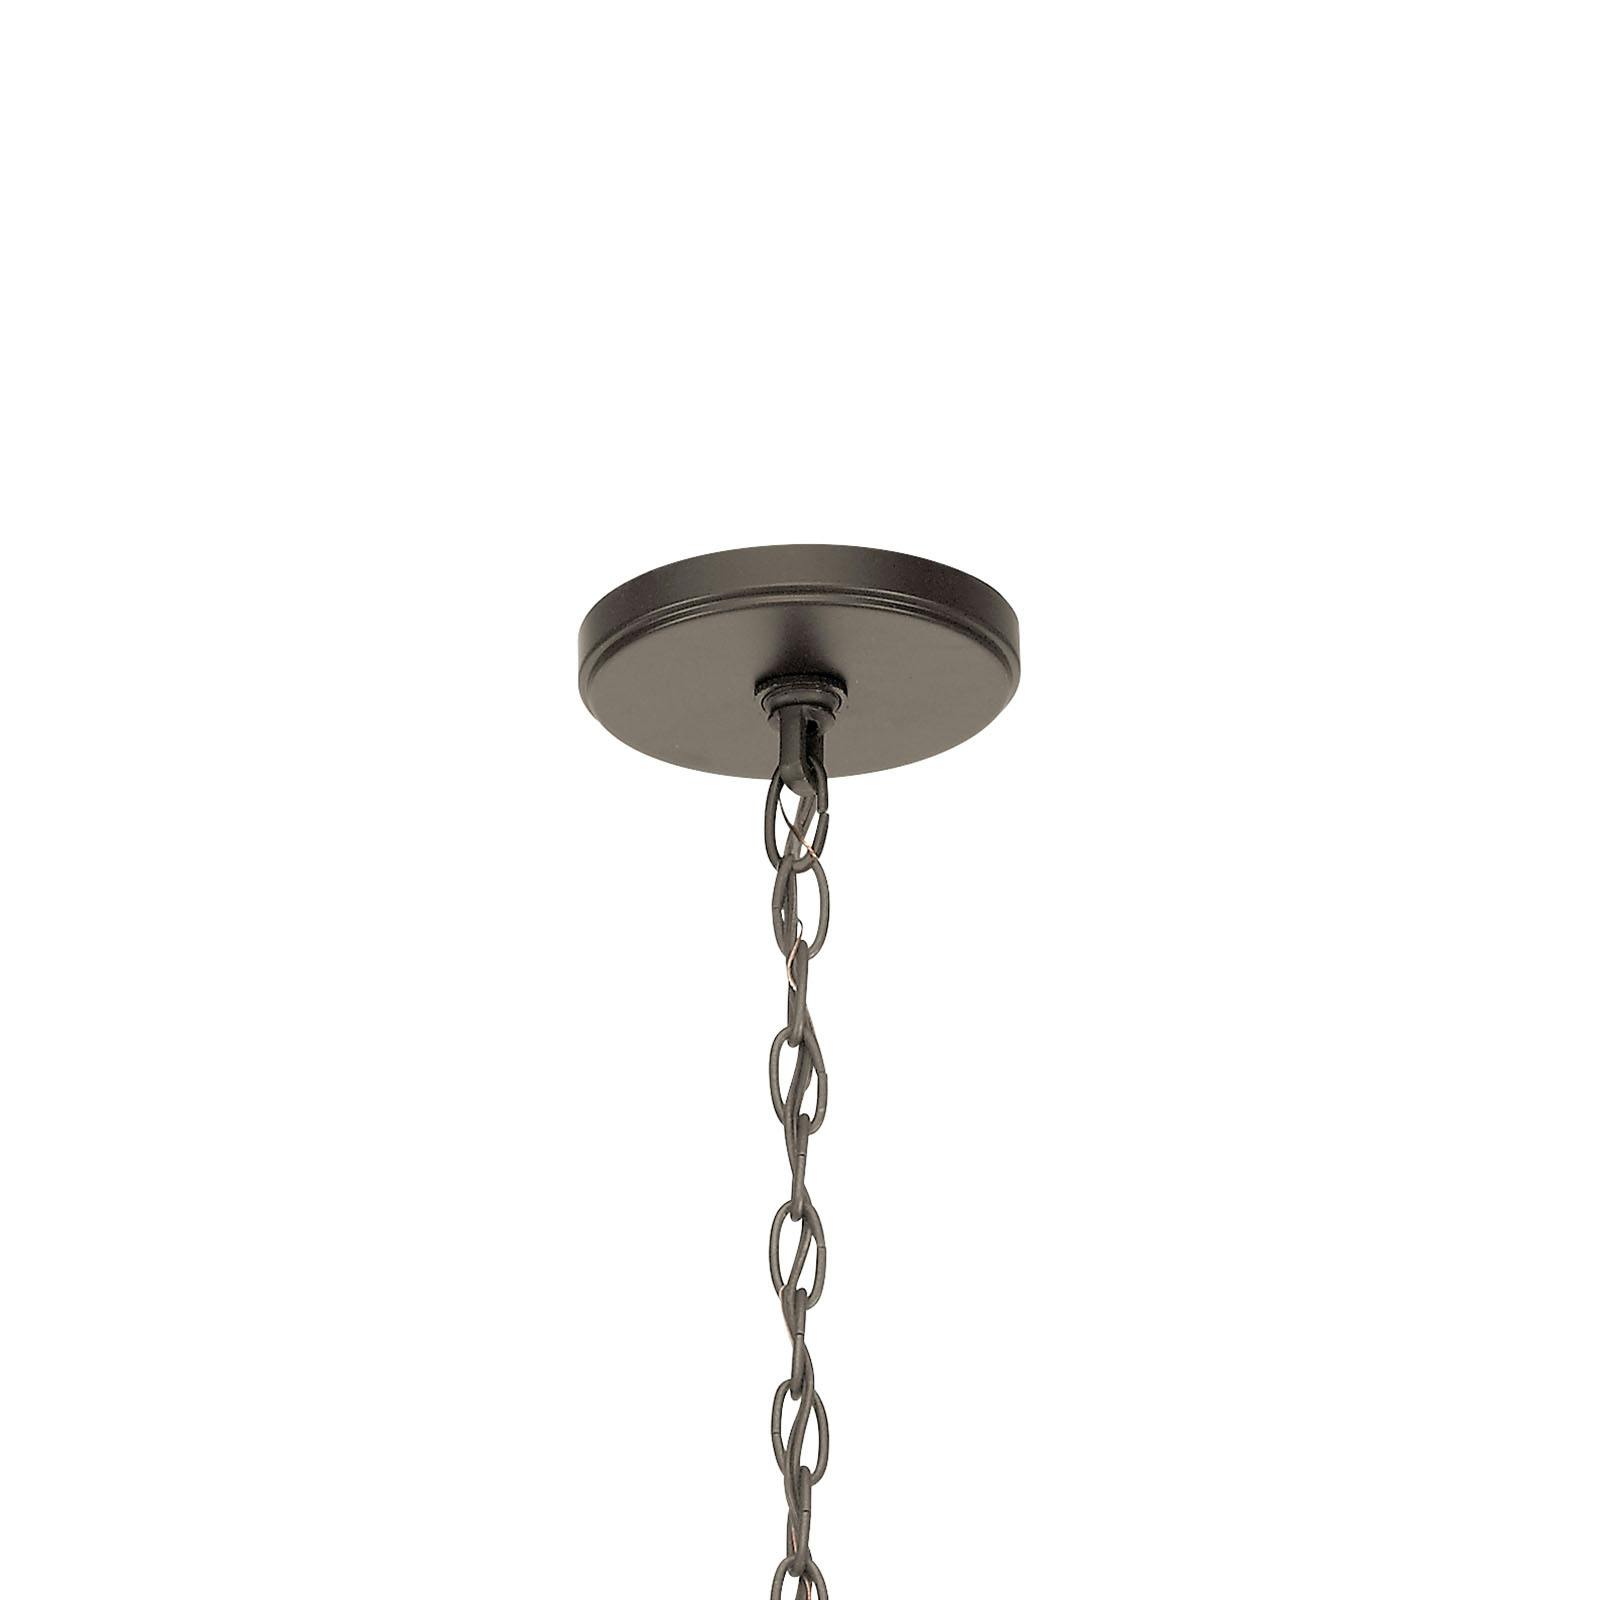 Canopy image of the Aldean Pendant 82266 on a white background